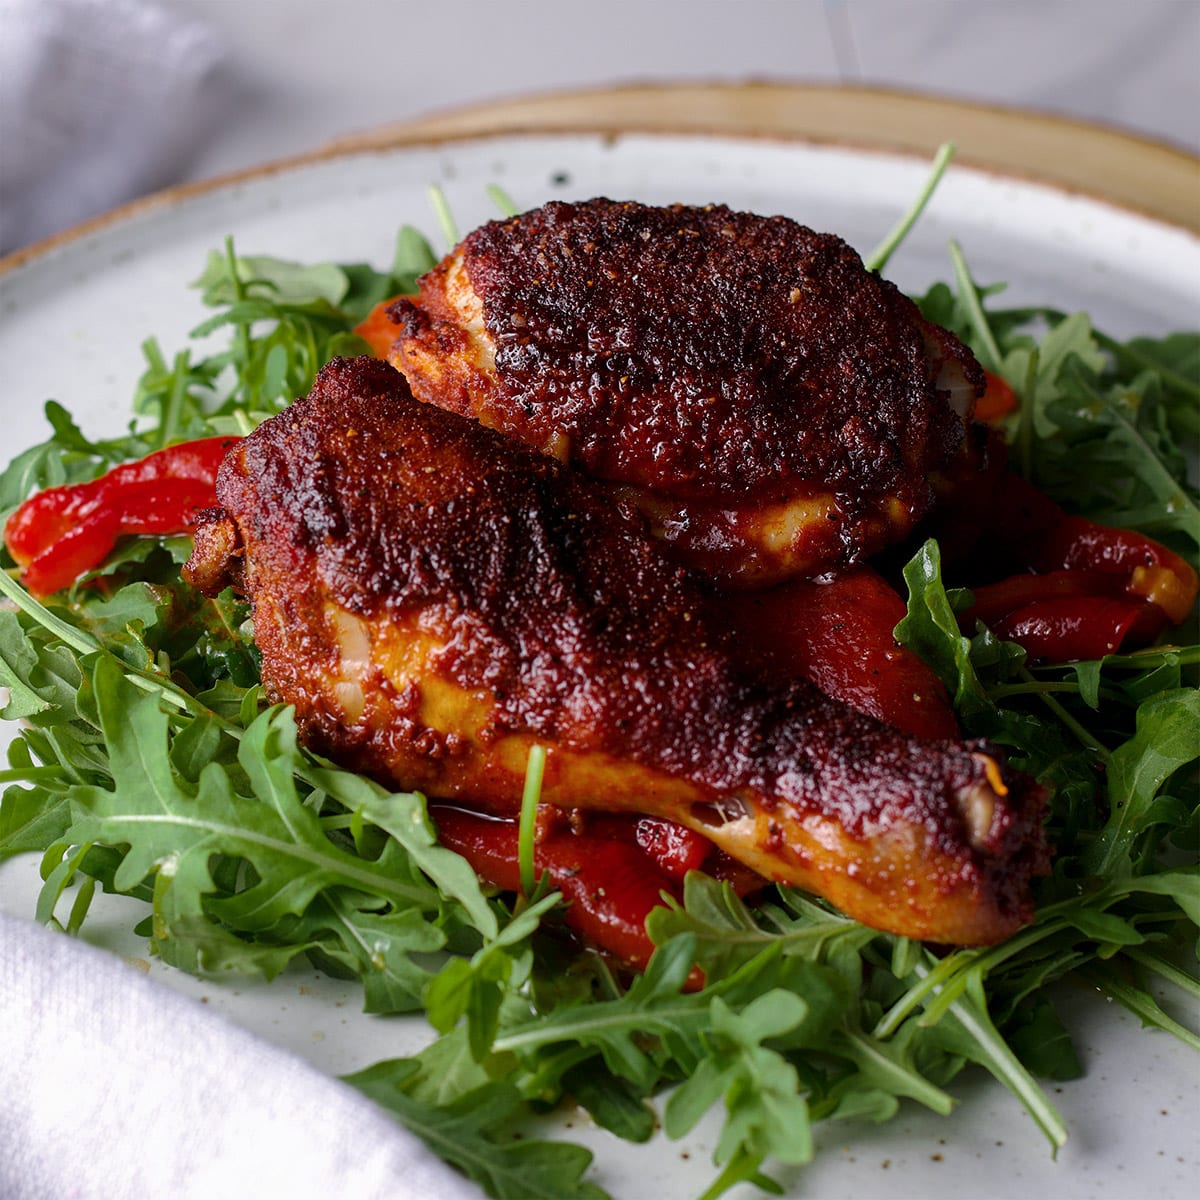 A plate filled with baked paprika chicken served on a bed of arugula and marinated roasted peppers.